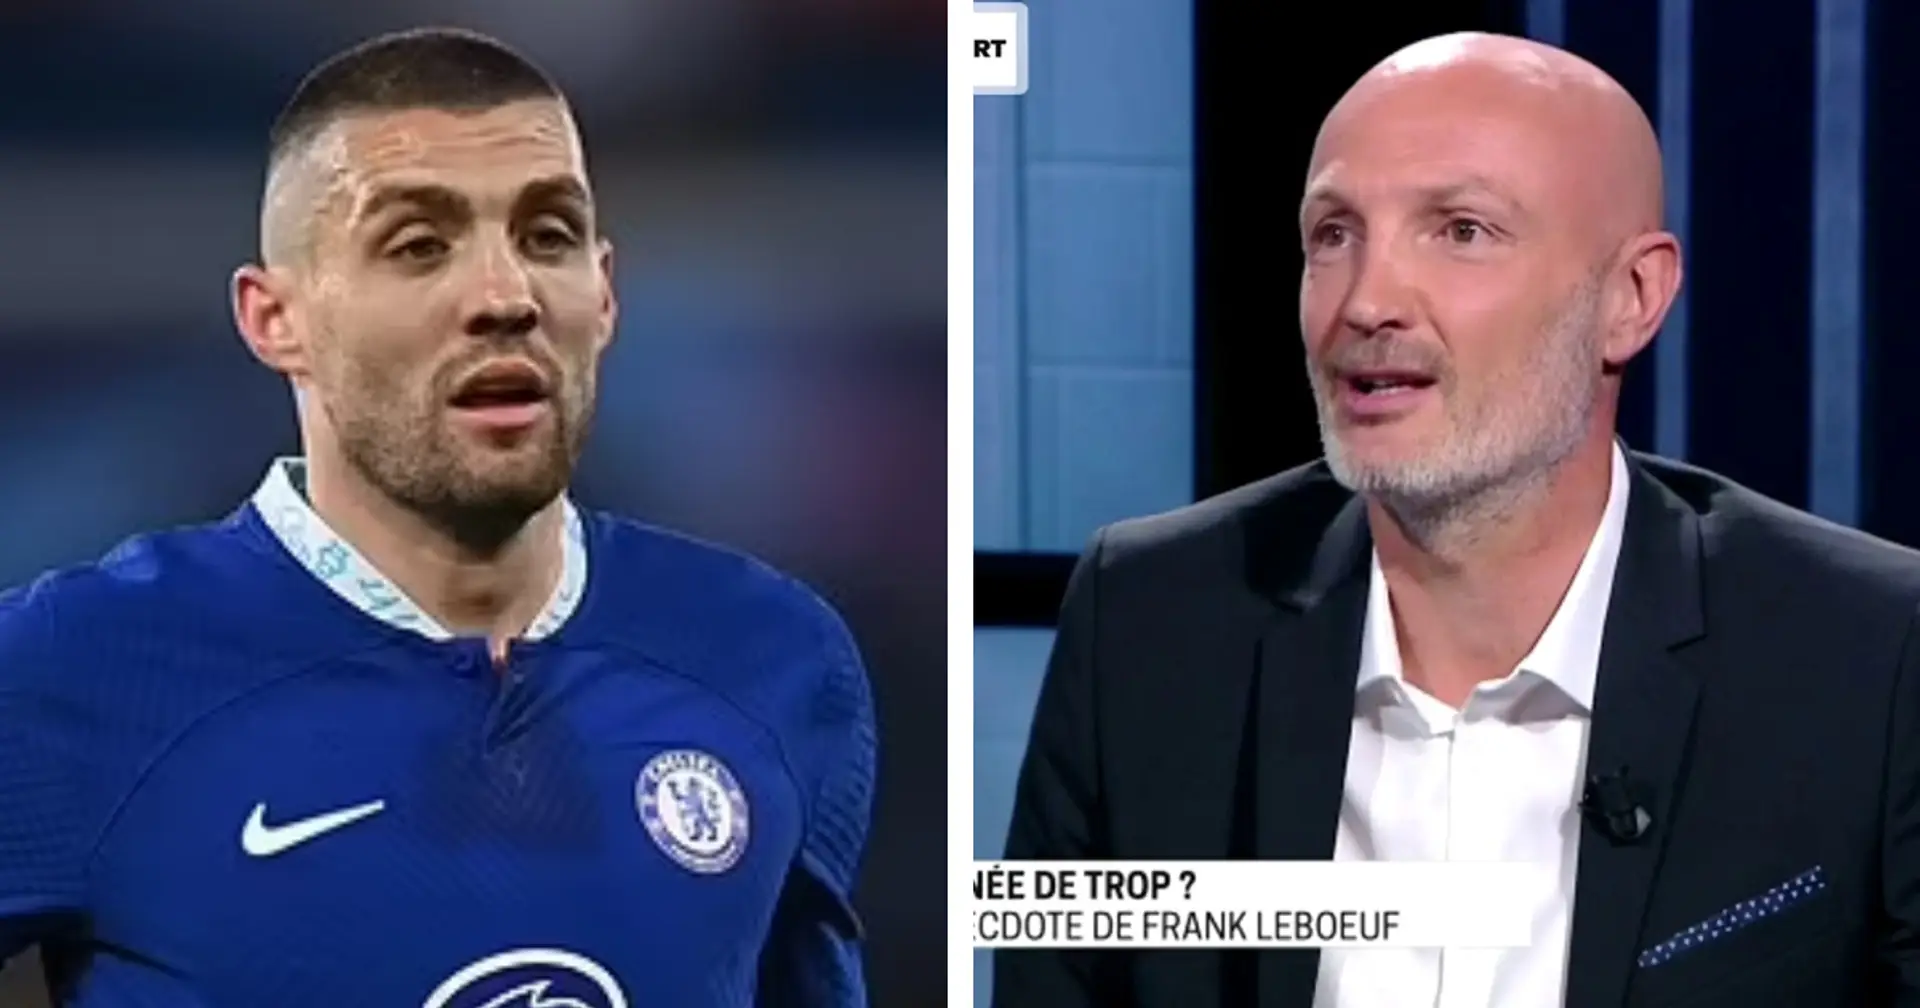 'Do you want to play 20 games a season?': Frank Leboeuf questions Mateo Kovacic's move to Man City